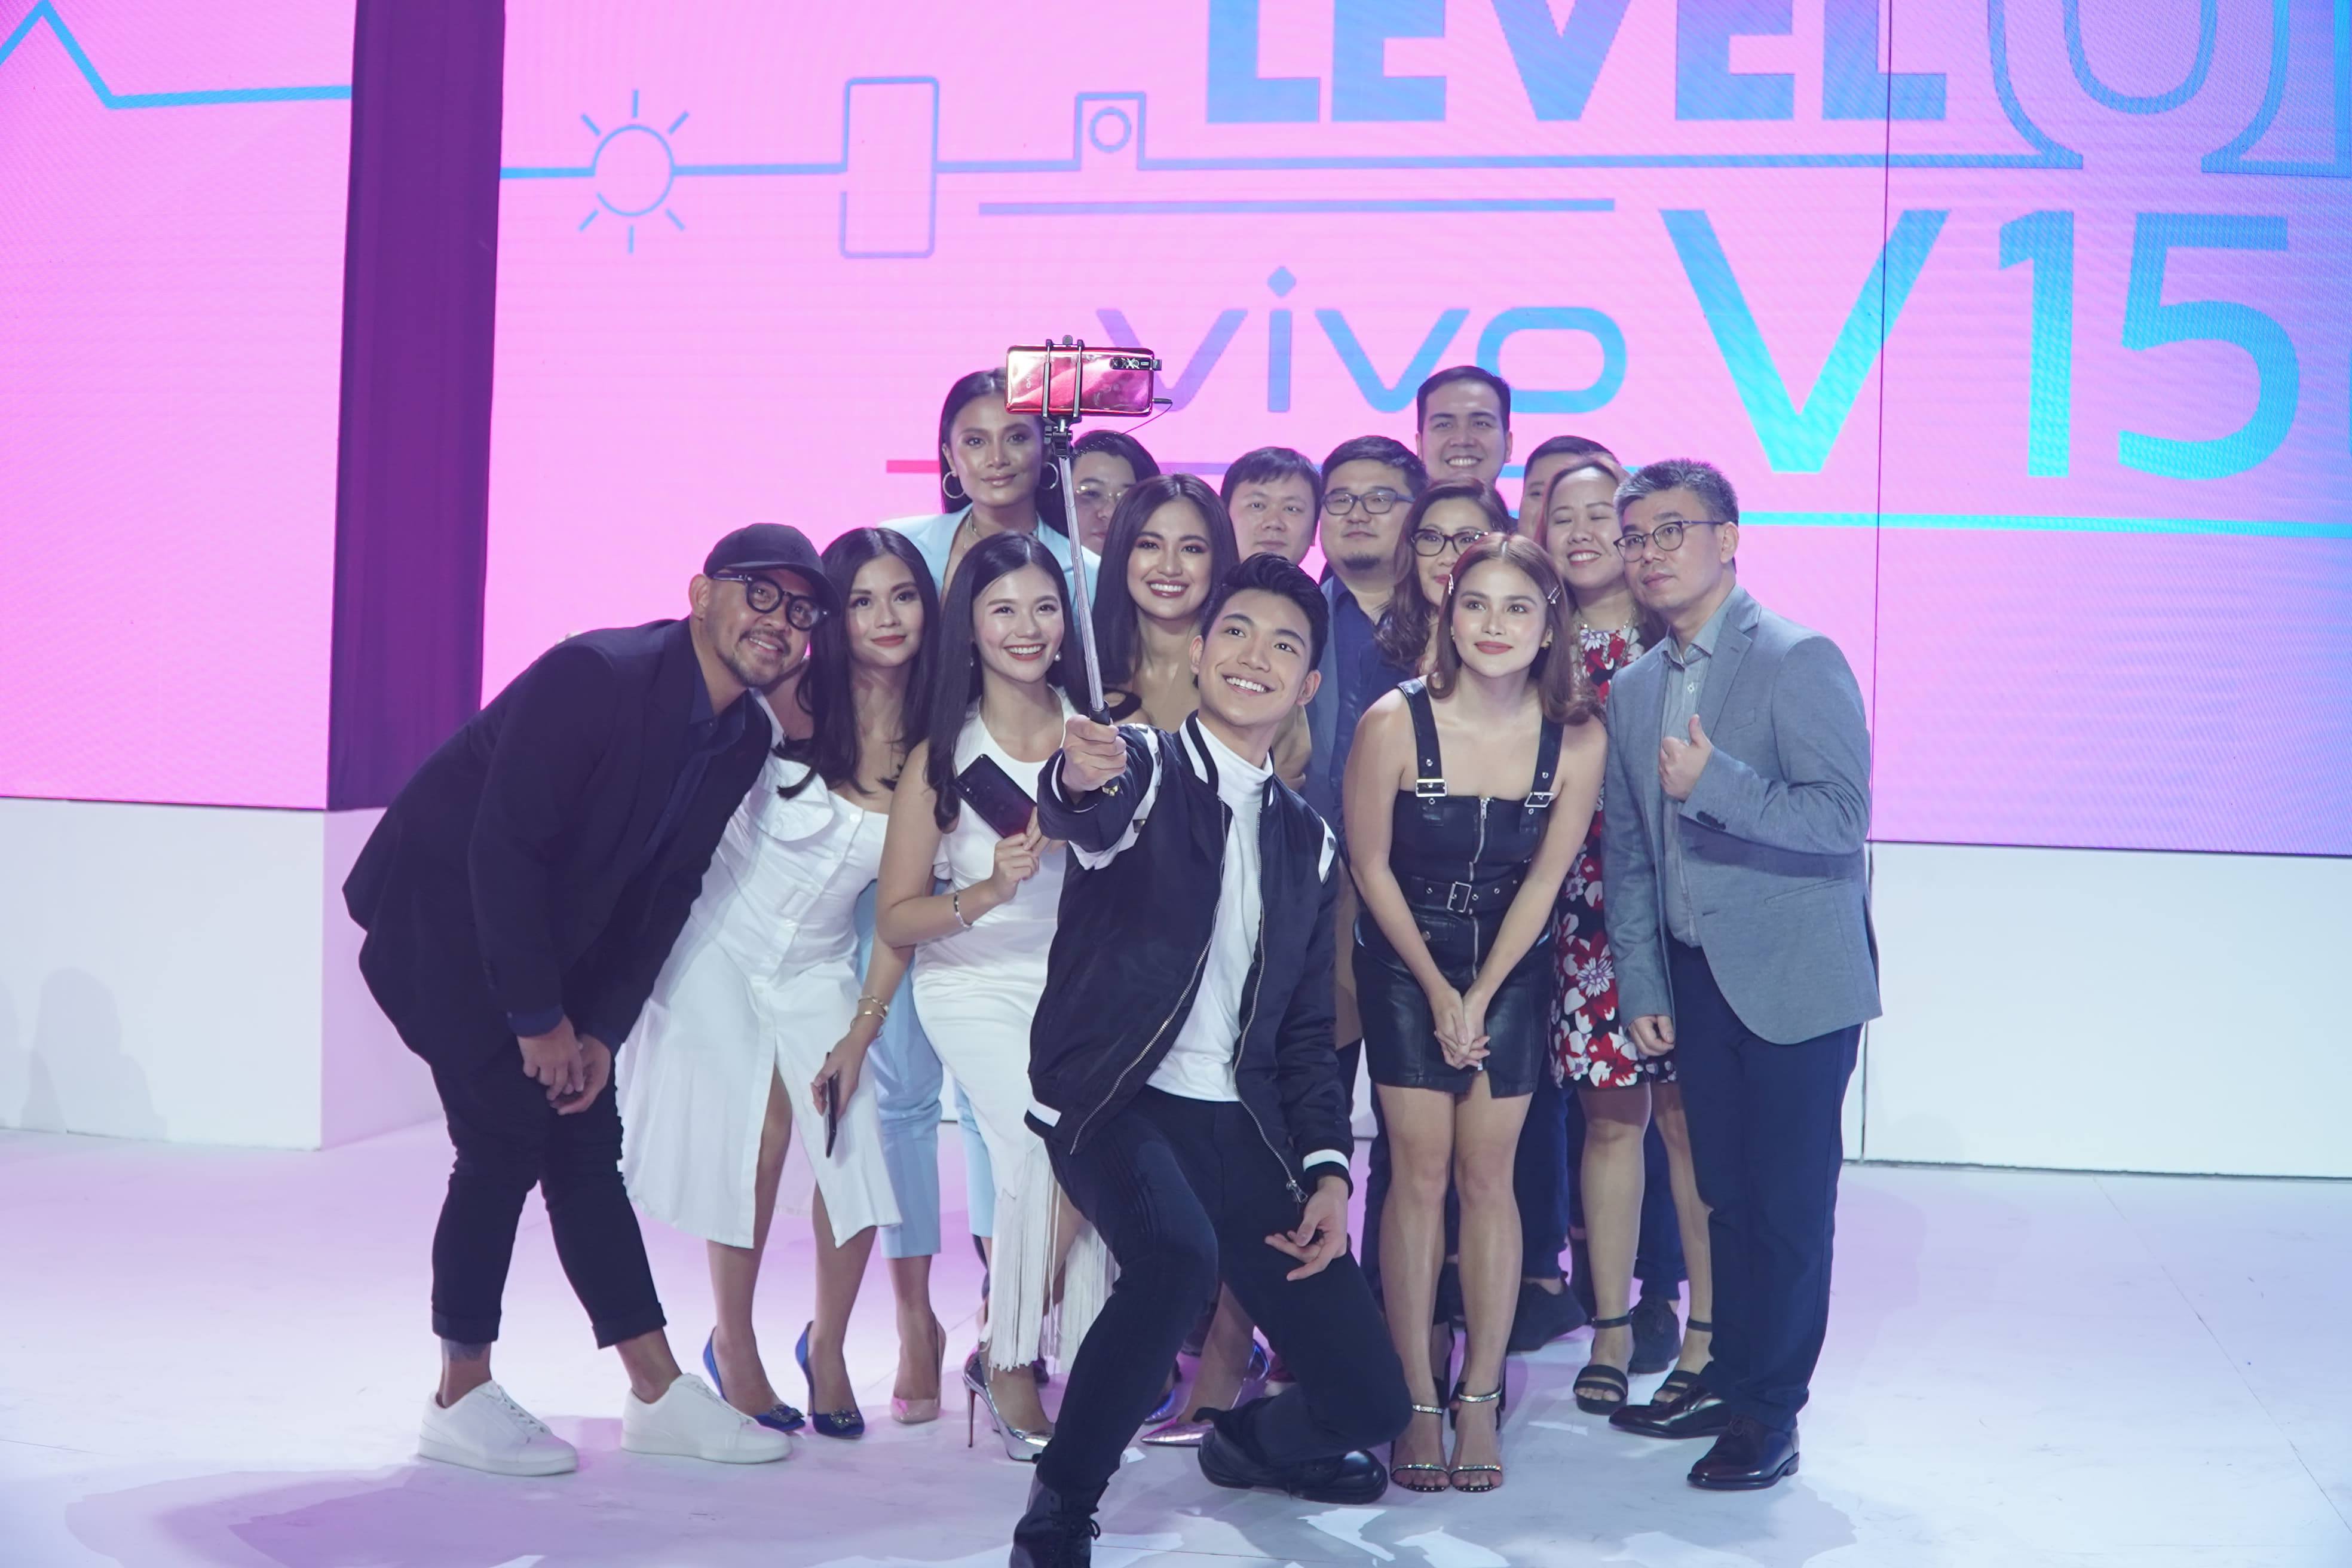 Darren Espanto uses the Vivo V15 Pro’s 32MP elevating front camera to snap a groufie with fellow singer Julie Ann San Jose, celebrities Elisse Joson and Klea Pineda, and Vivo executives